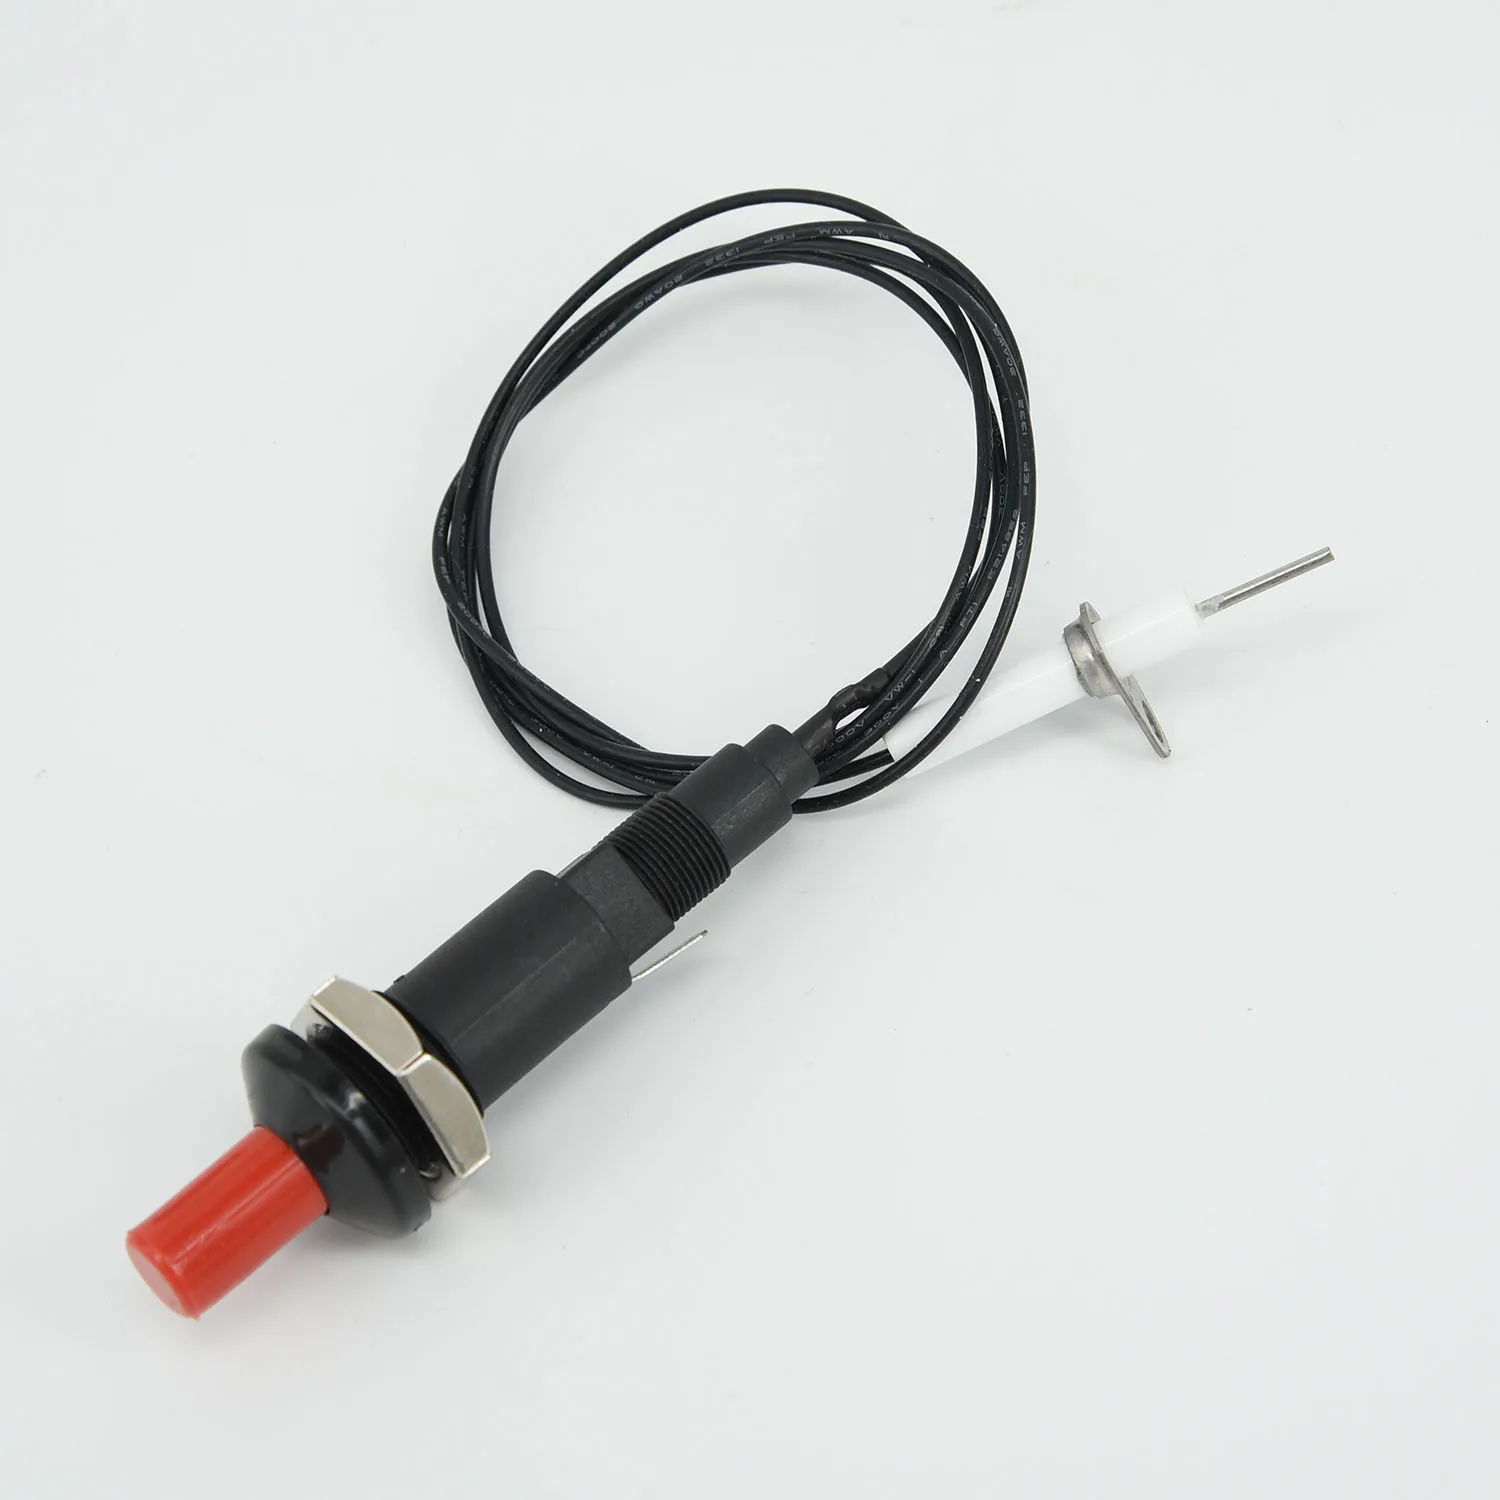 

With Cable Piezo Spark Ignition Barbecue Push Button Igniter For Gas Ovens Outdoor Camping Grill Practical Hot